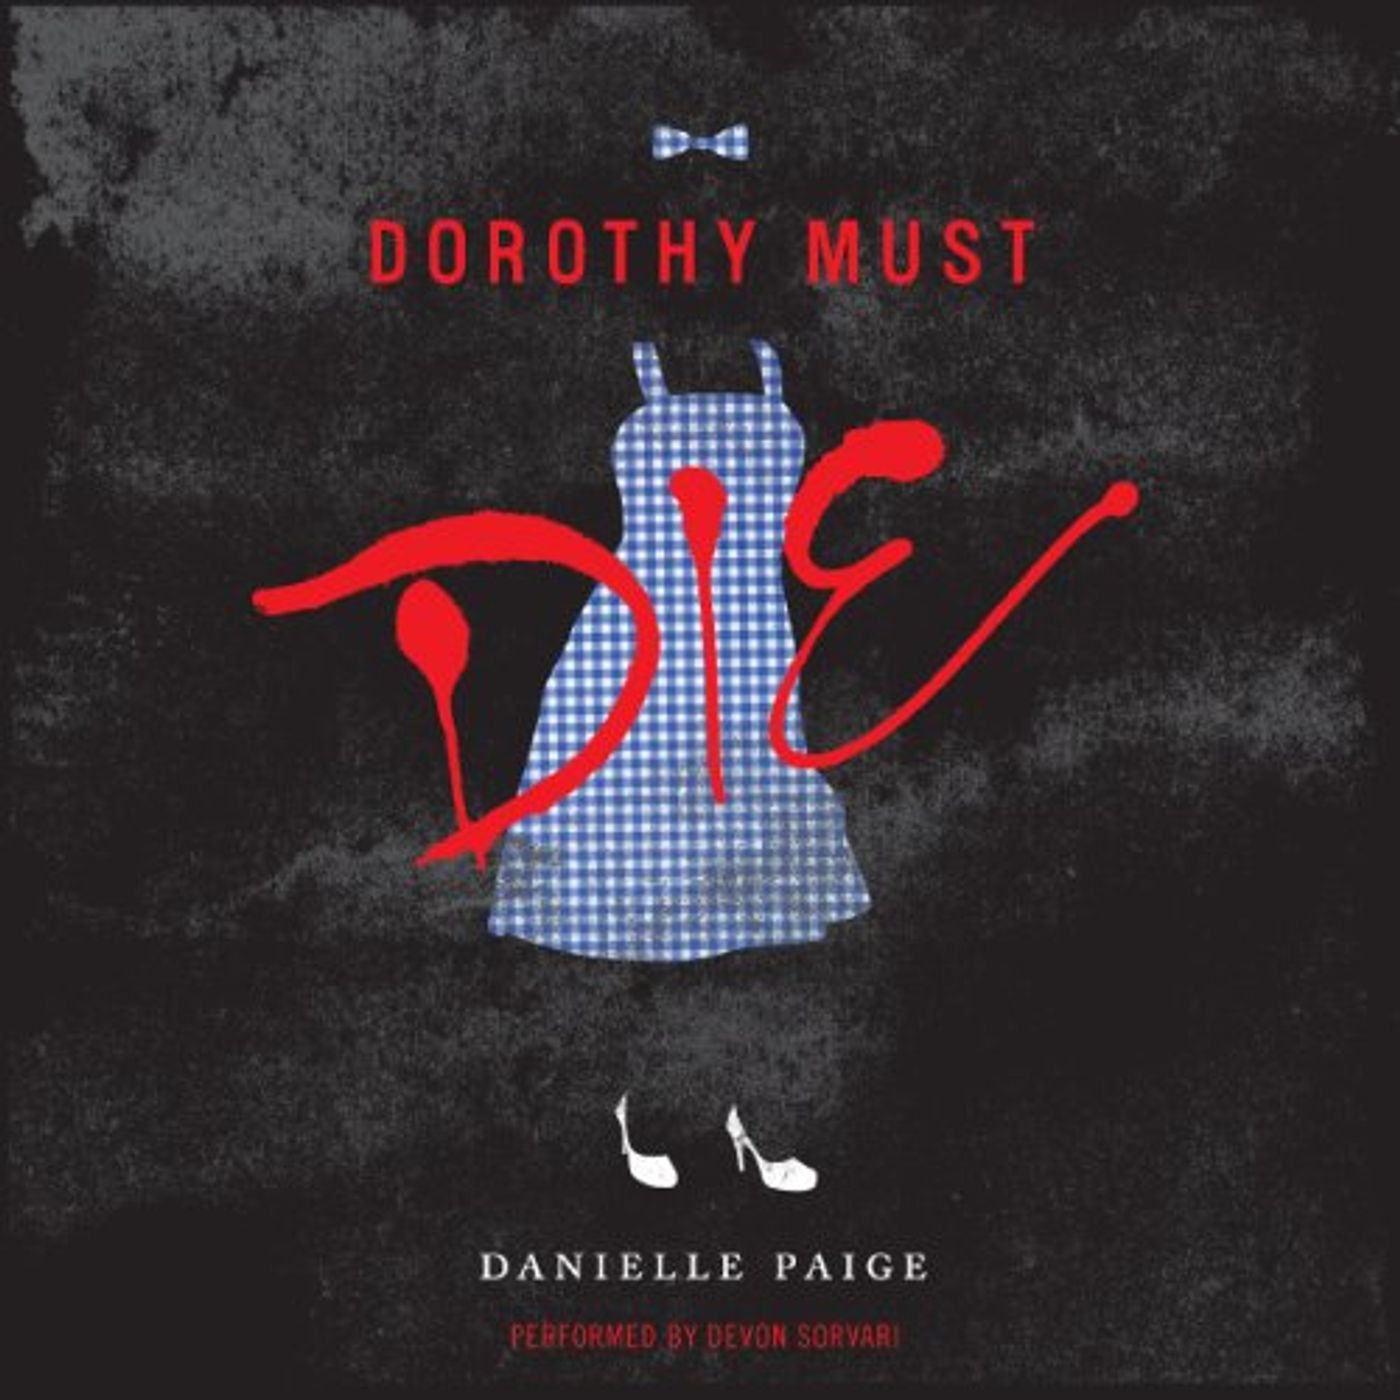 Dorothy Must Die by Danielle Paige ch2